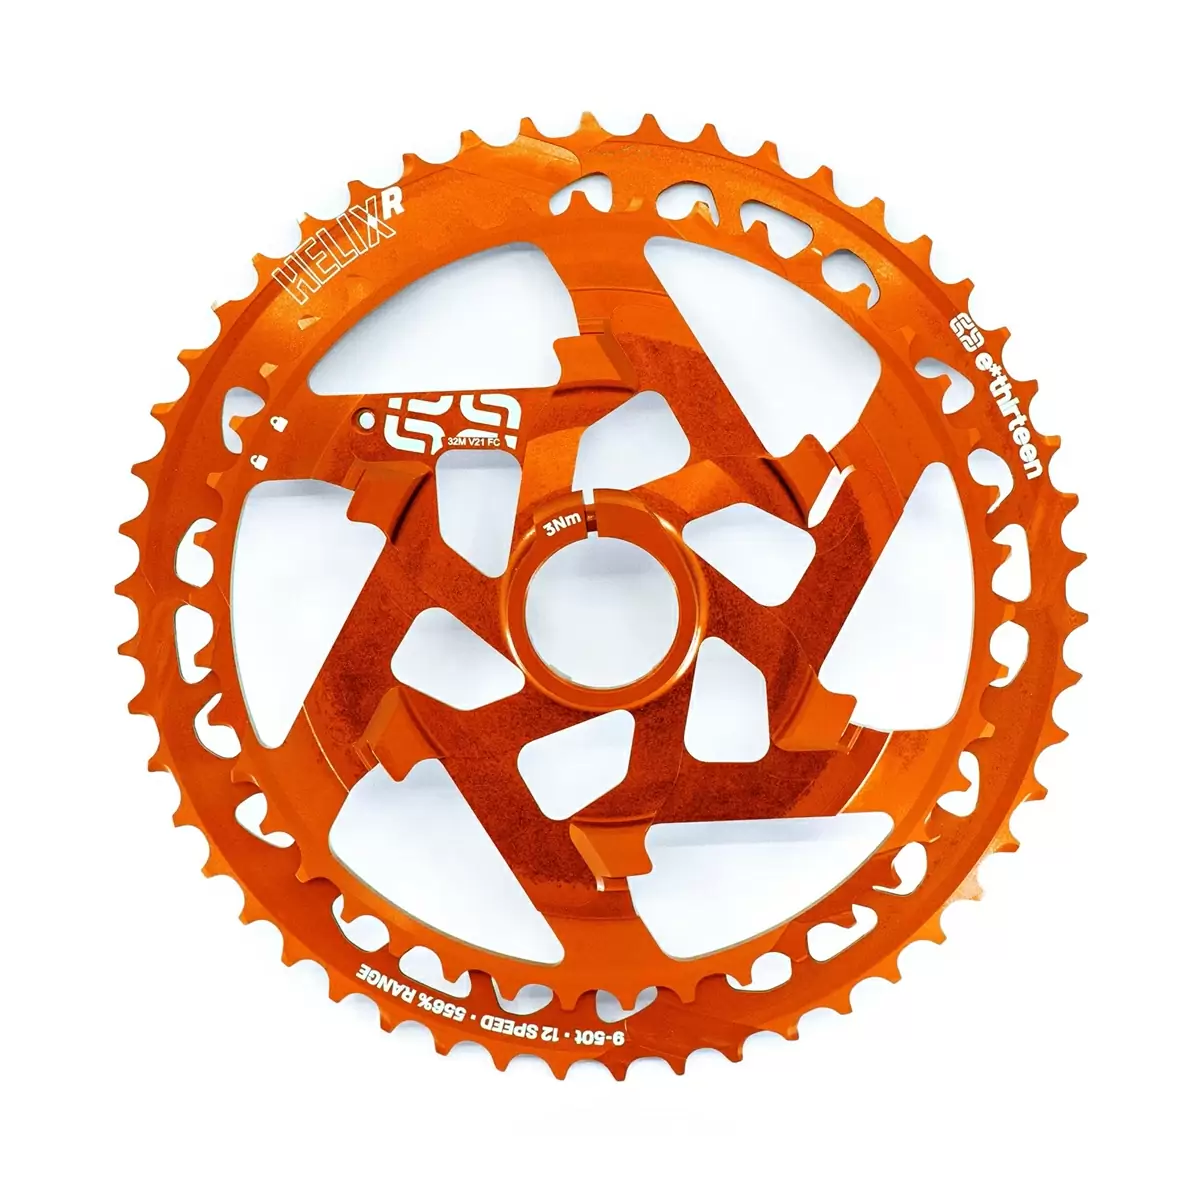 Helix Race 12s Cassette Replacement Cluster 42-50T SRAM XD/XDR Orange - image